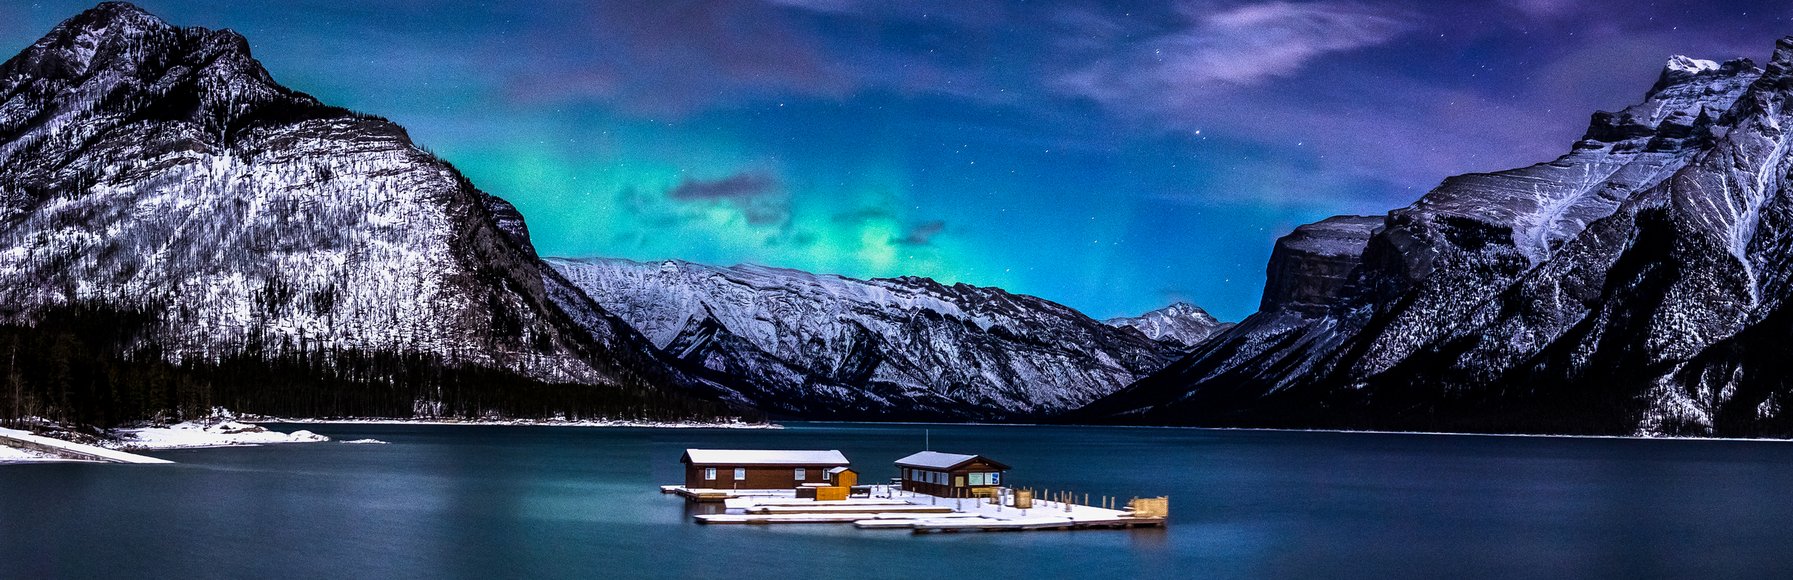 Northern lights in the winter nights sky above a floating dock on a lake with mountains in the background.